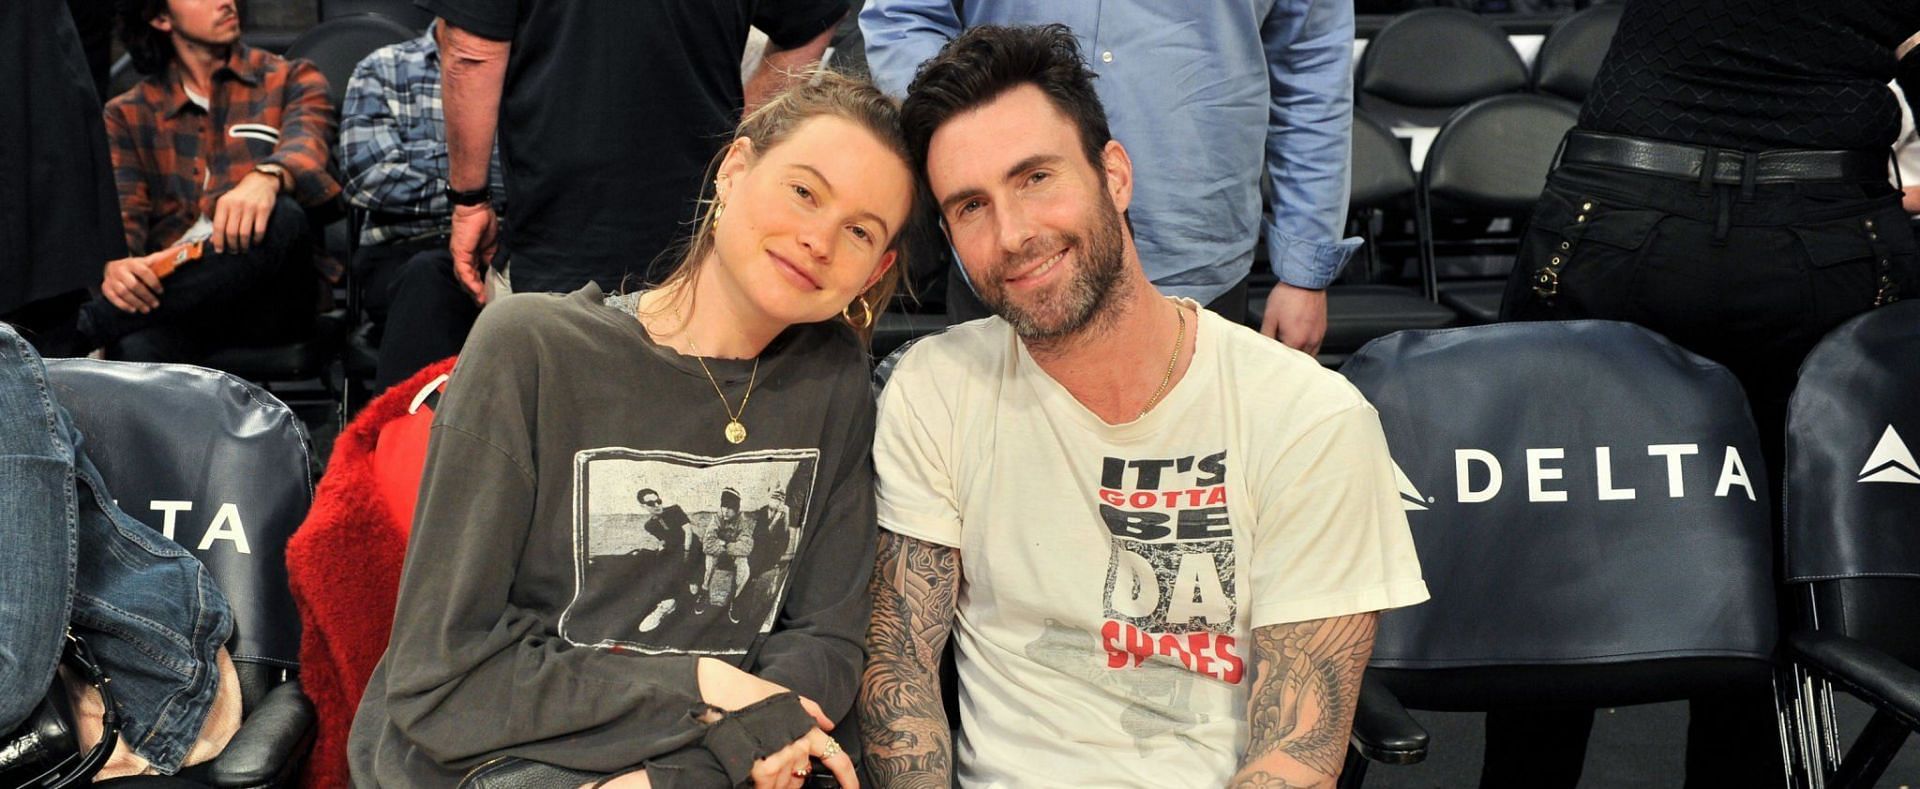 Adam Levine and Behati Prinsloo tied the knot in 2014 (Image via Getty Images)